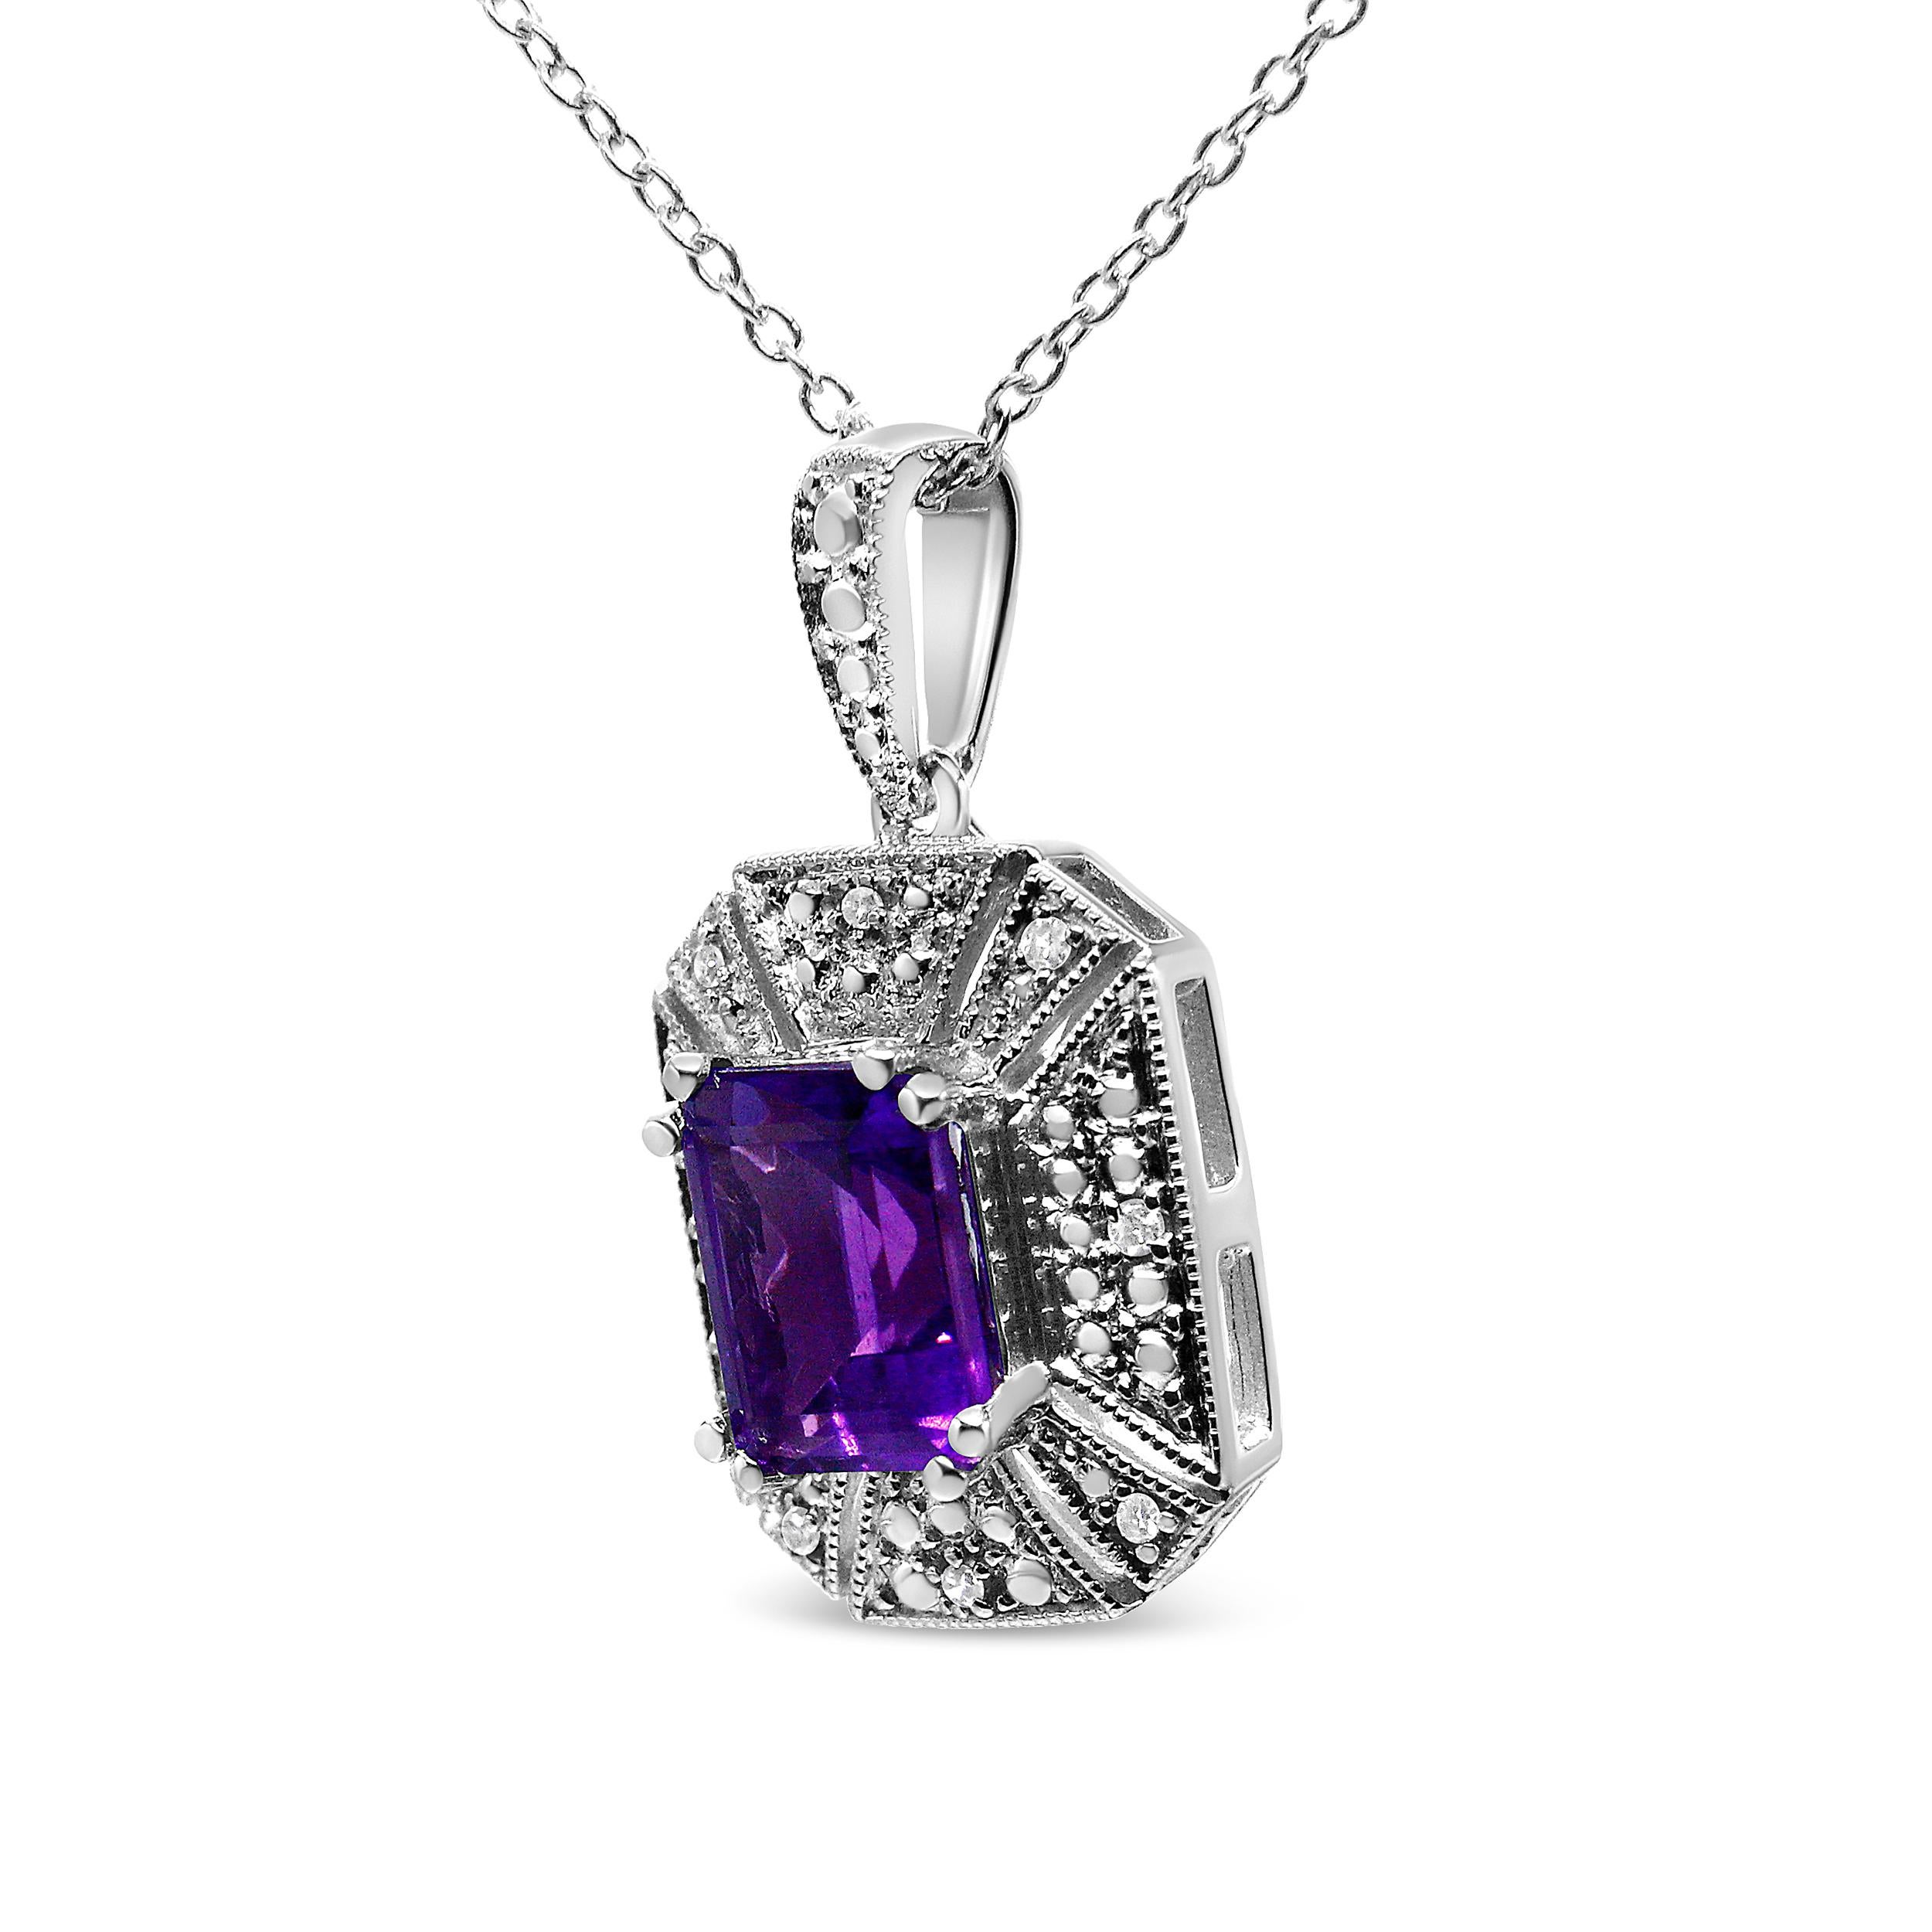 This Art Deco-inspired pendant necklace is made to make a statement. The .925 Sterling Silver necklace features an intricate design in an alluring emerald shape, accented with a rich 8x6mm emerald-cut natural purple Amethyst gemstone that adds that